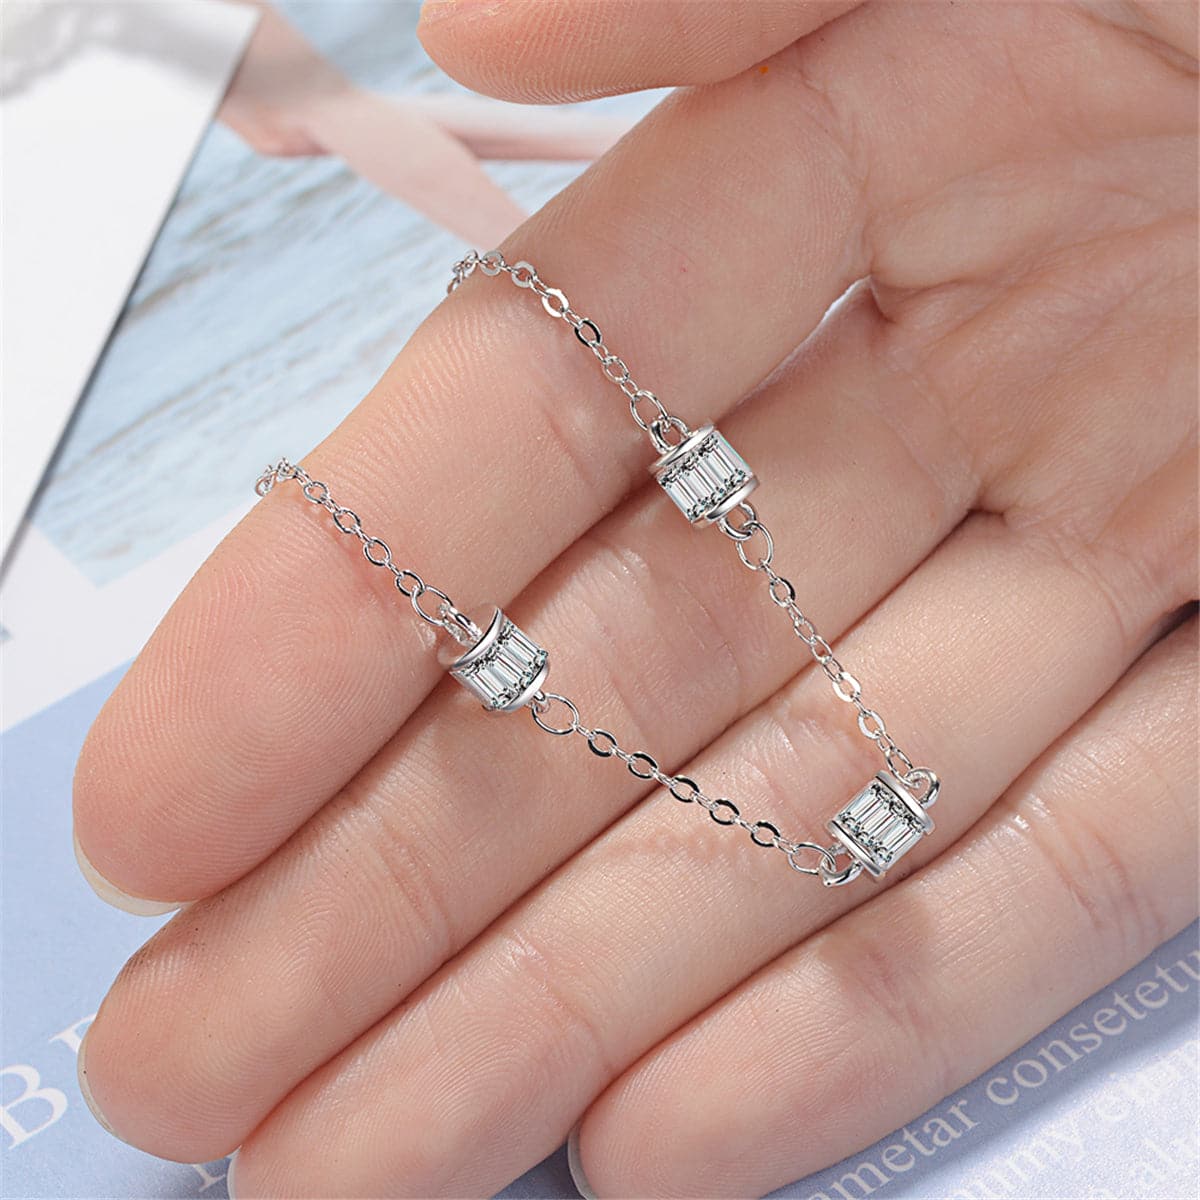 Cubic Zirconia & Silver-Plated Cage Charm Bracelet